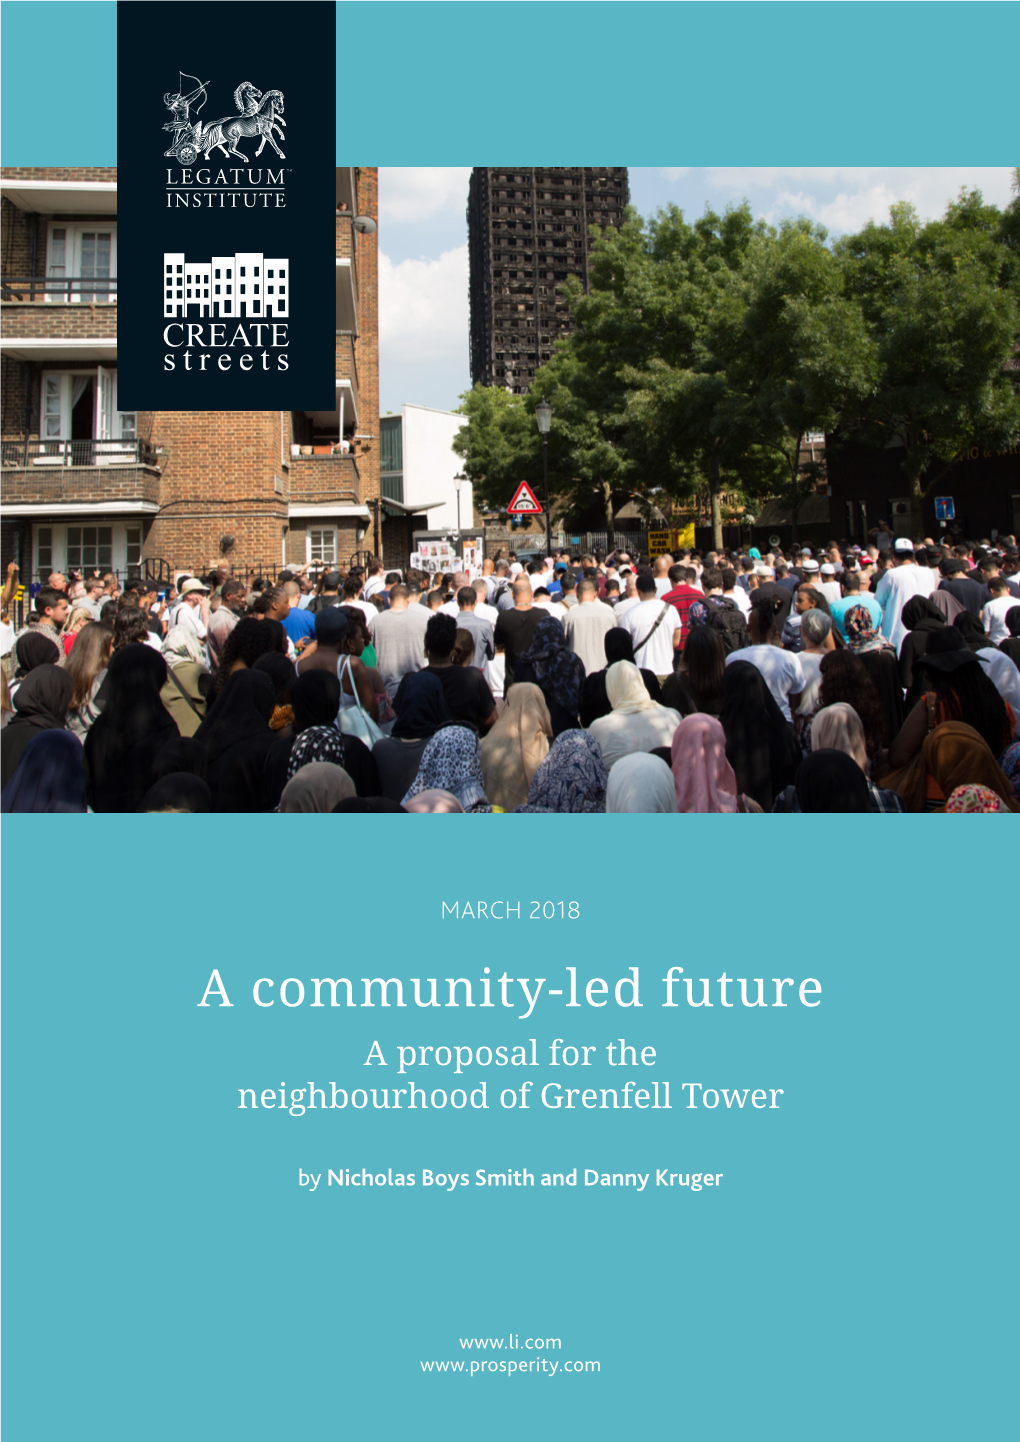 A Community-Led Future a Proposal for the Neighbourhood of Grenfell Tower